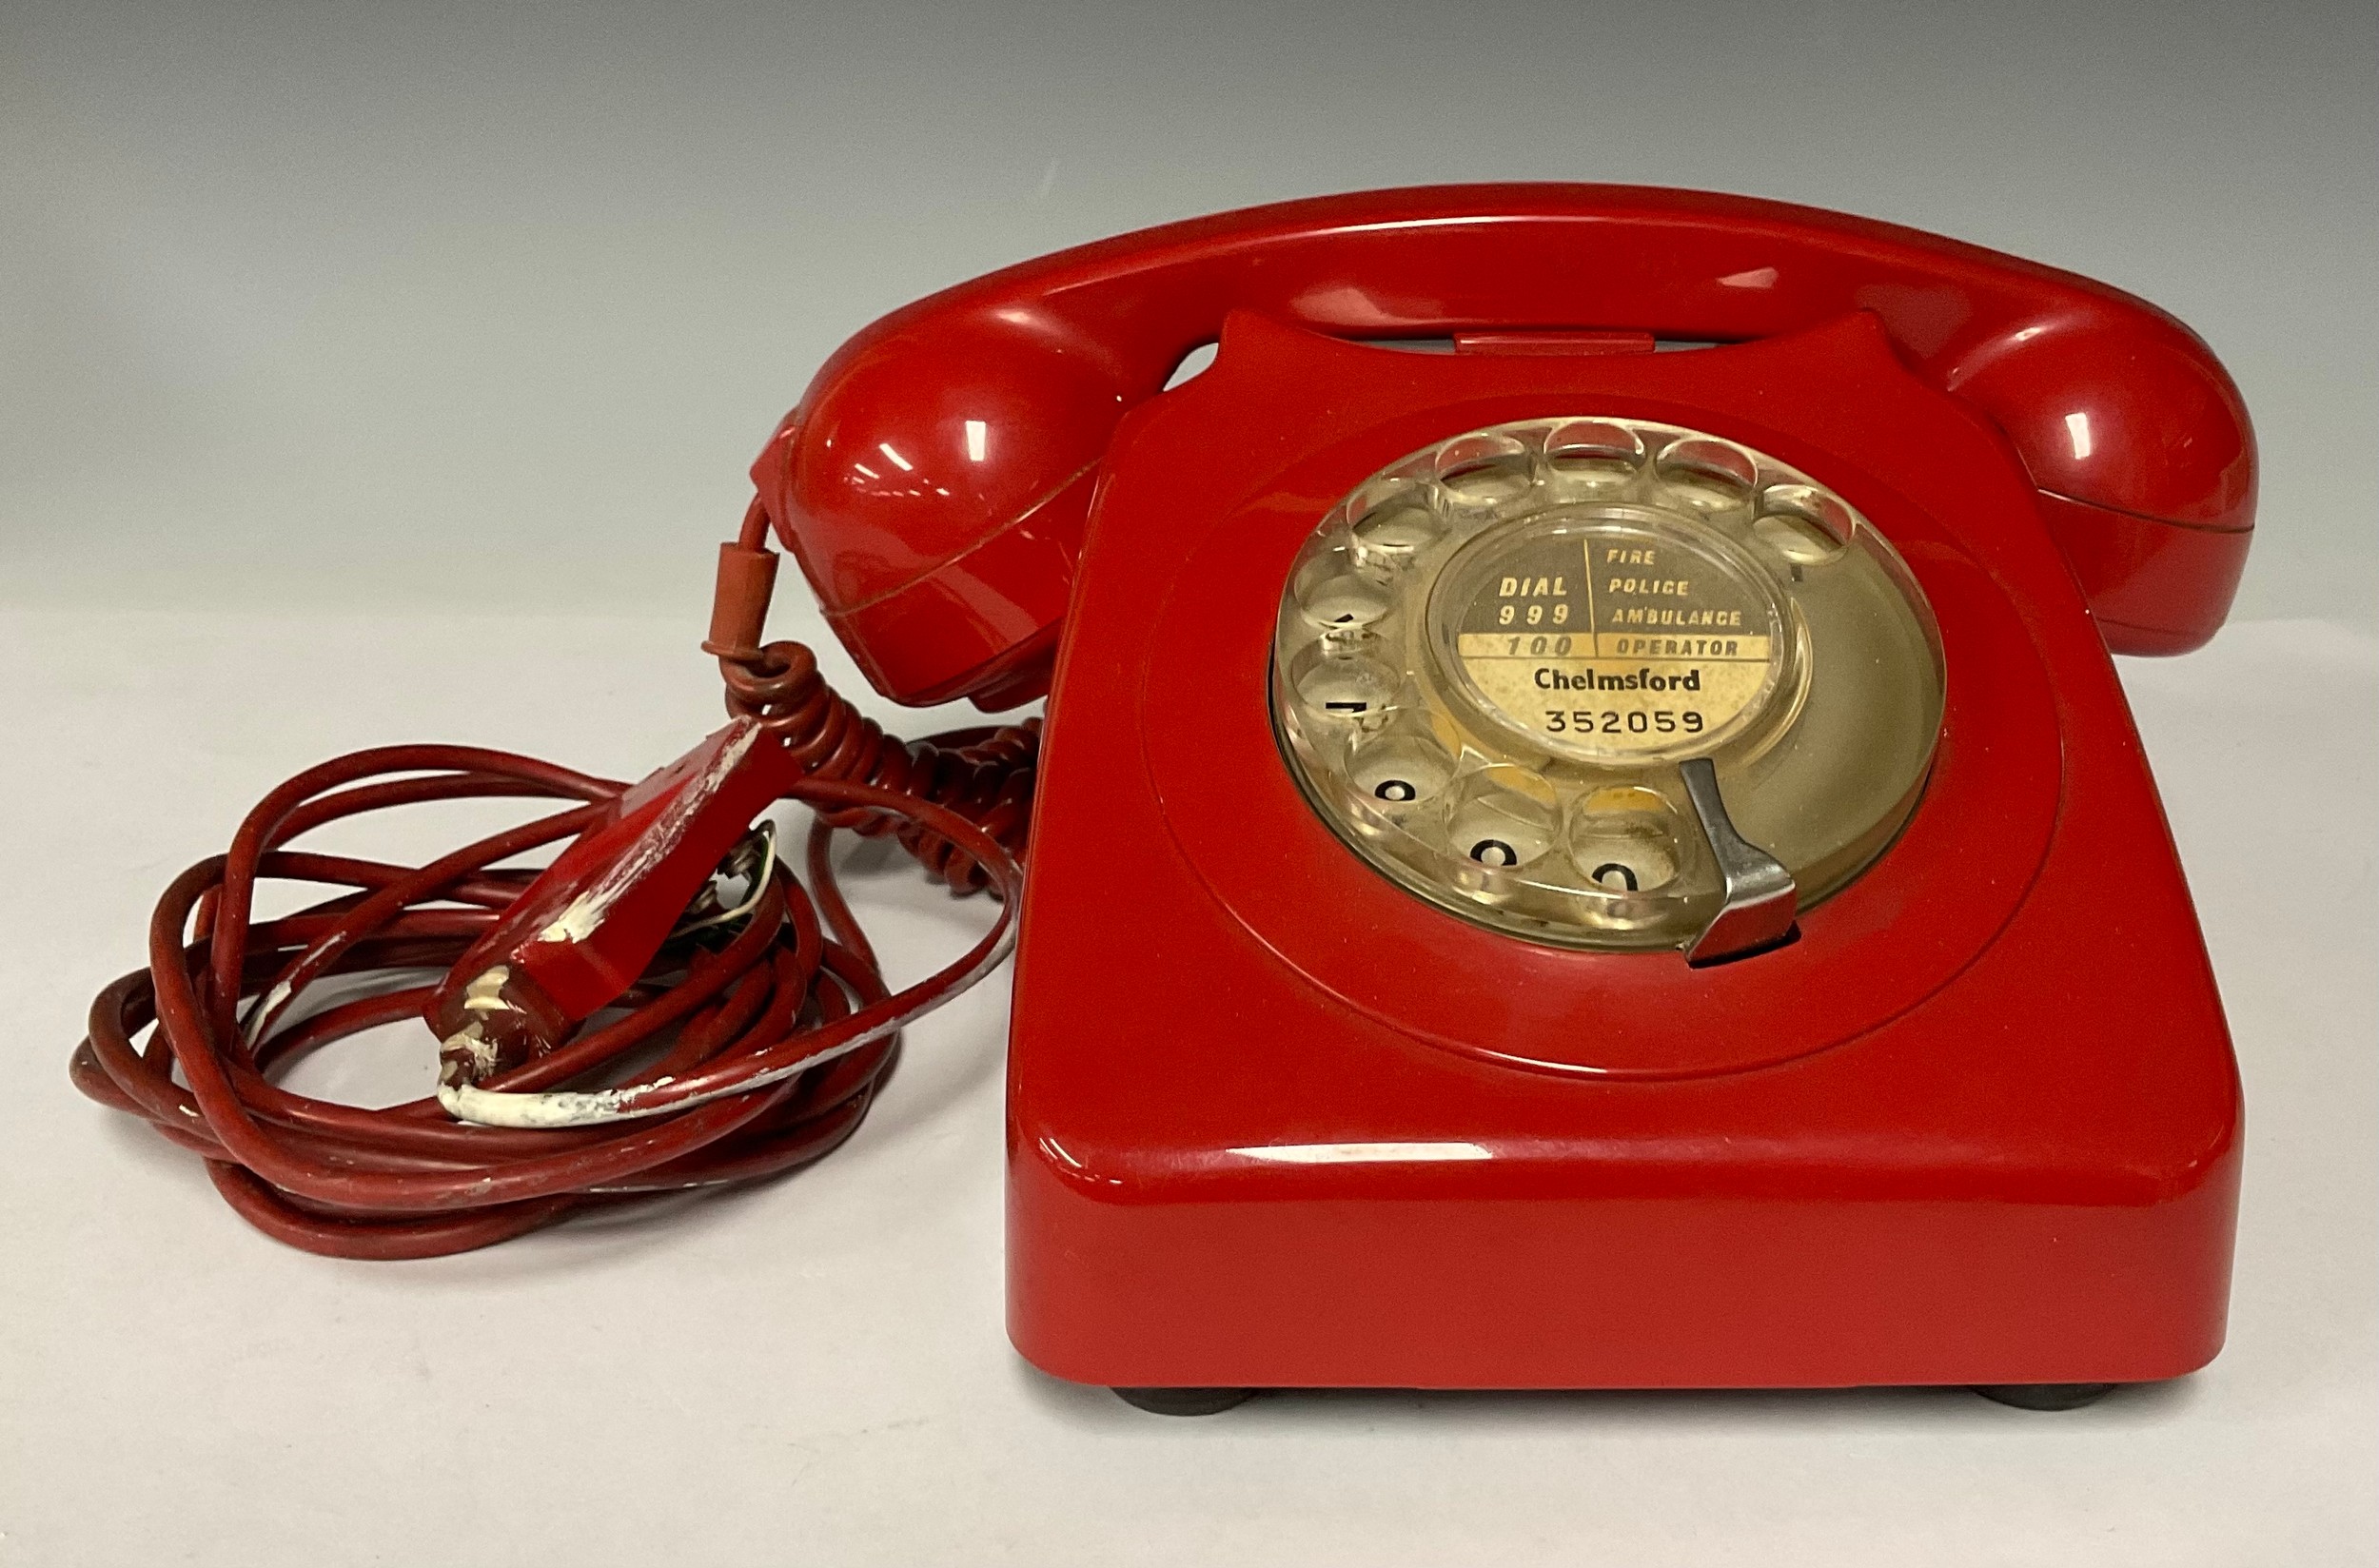 Boxes & Objects - Telephones - a 1960's rotary dial telephone, model 746F SPK 72/1, in red - Image 2 of 2